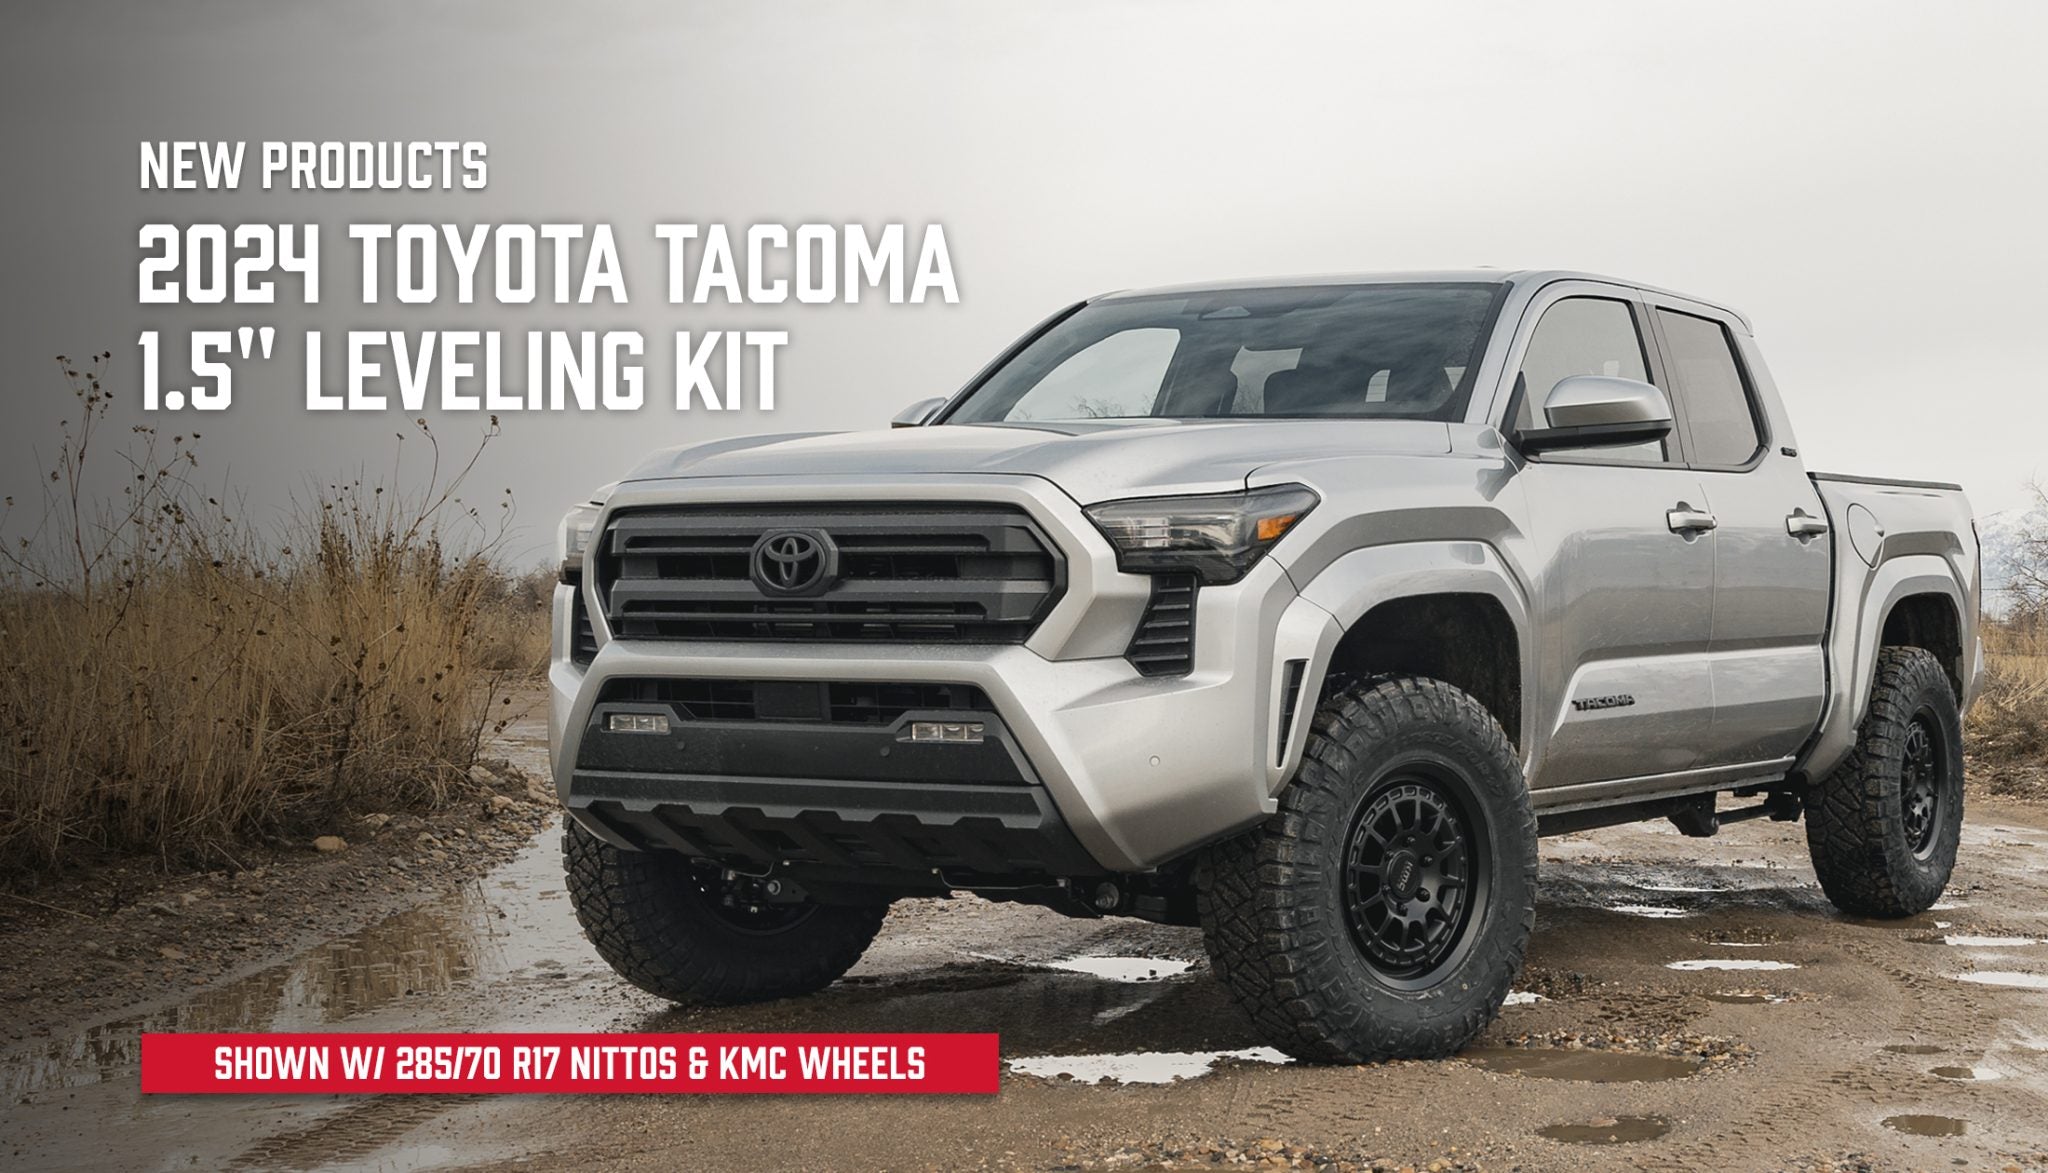 ReadyLIFT launches 1.5" Leveling Kit for the New 2024 Toyota Tacoma